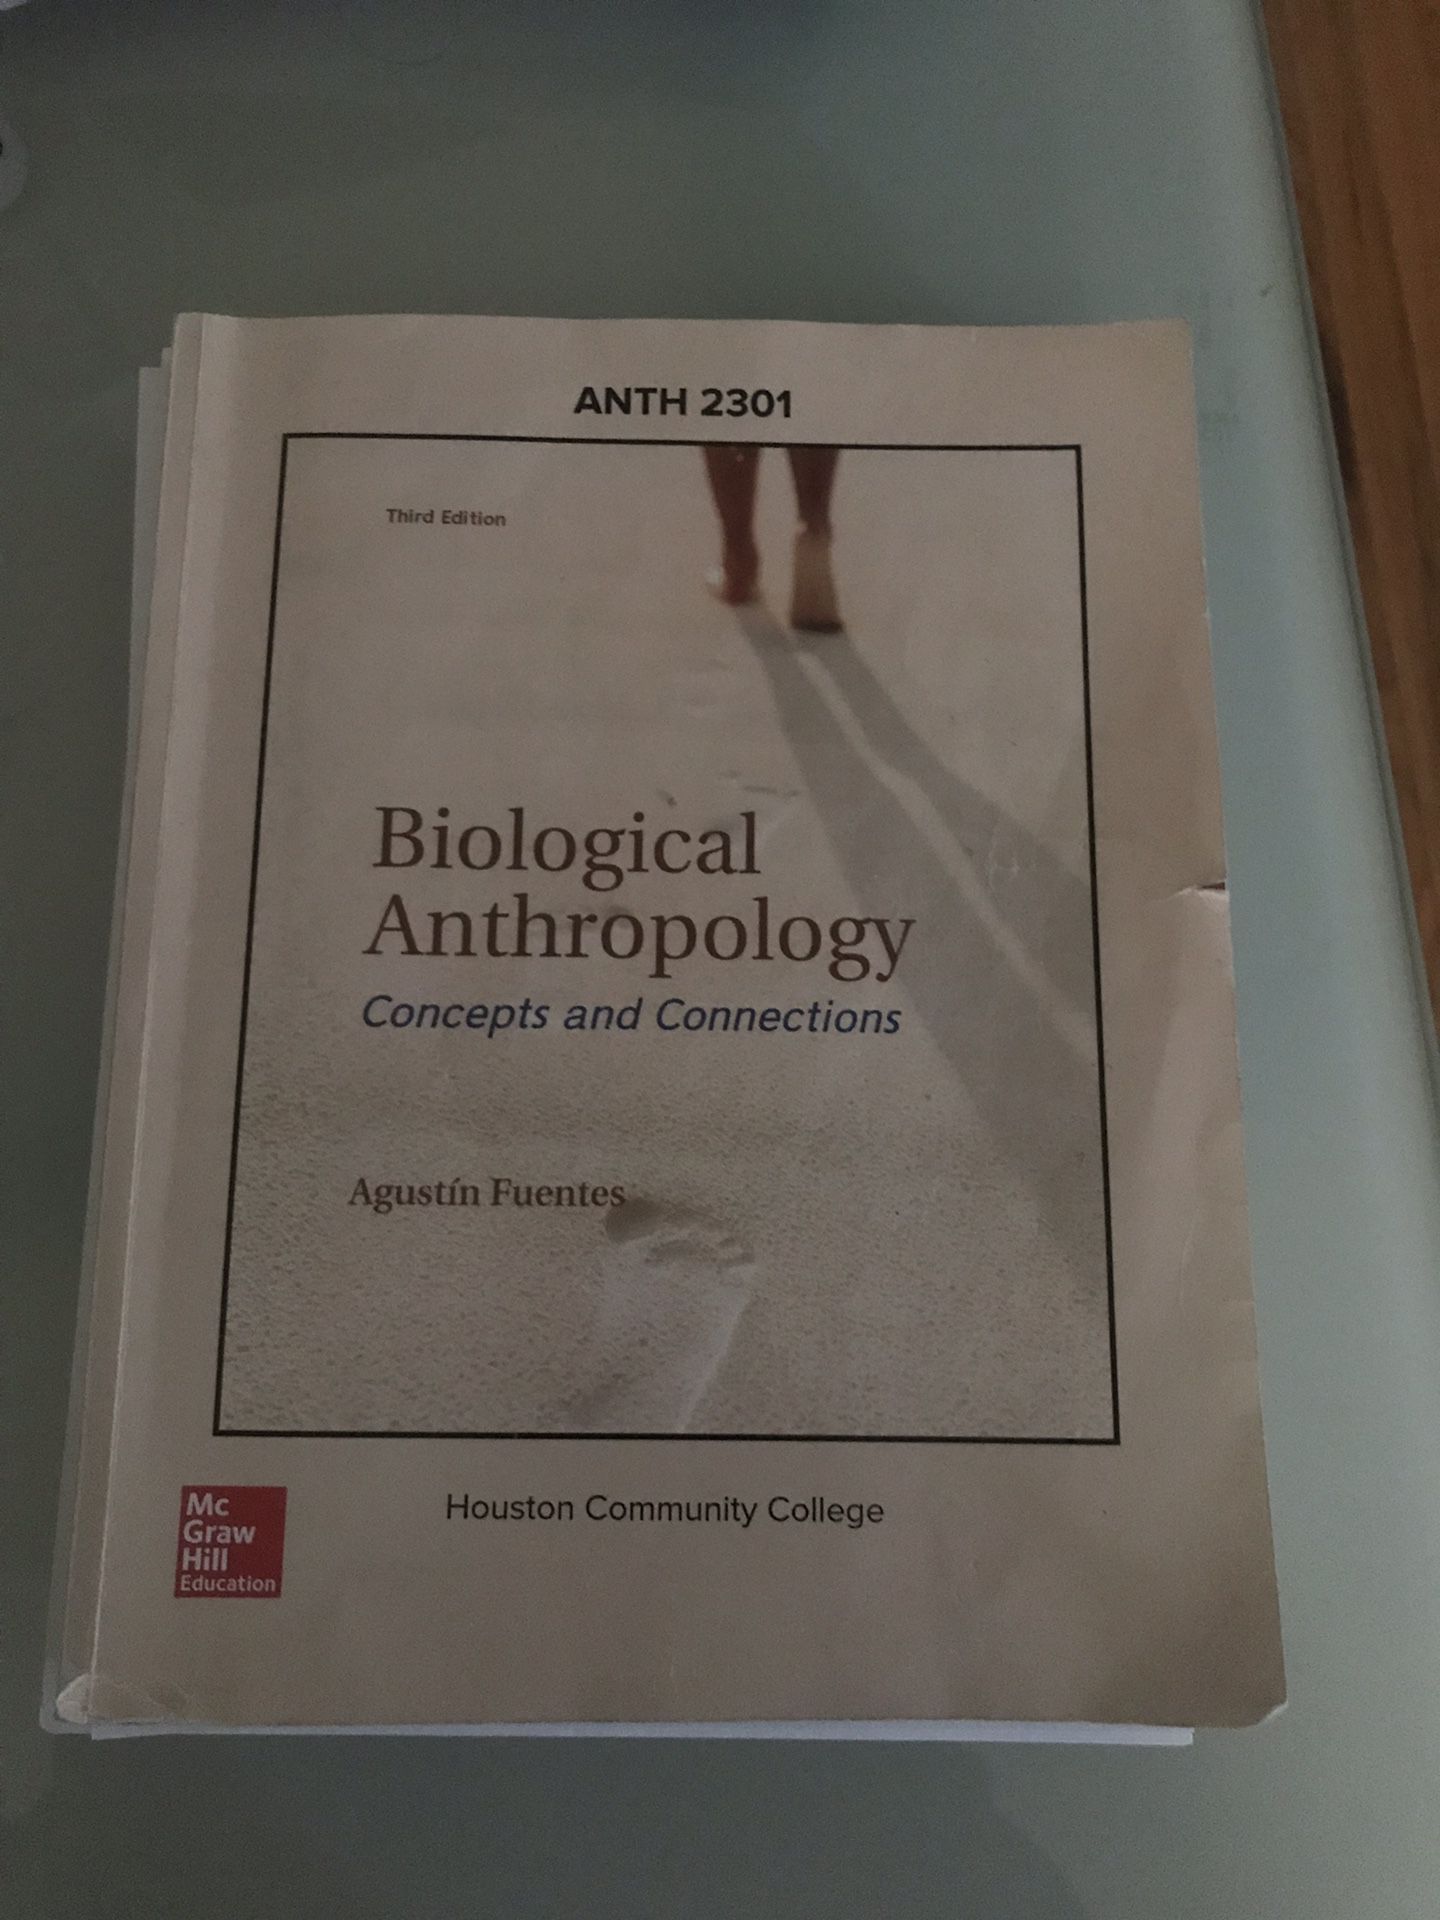 Biological Anthropology 2301 textbook